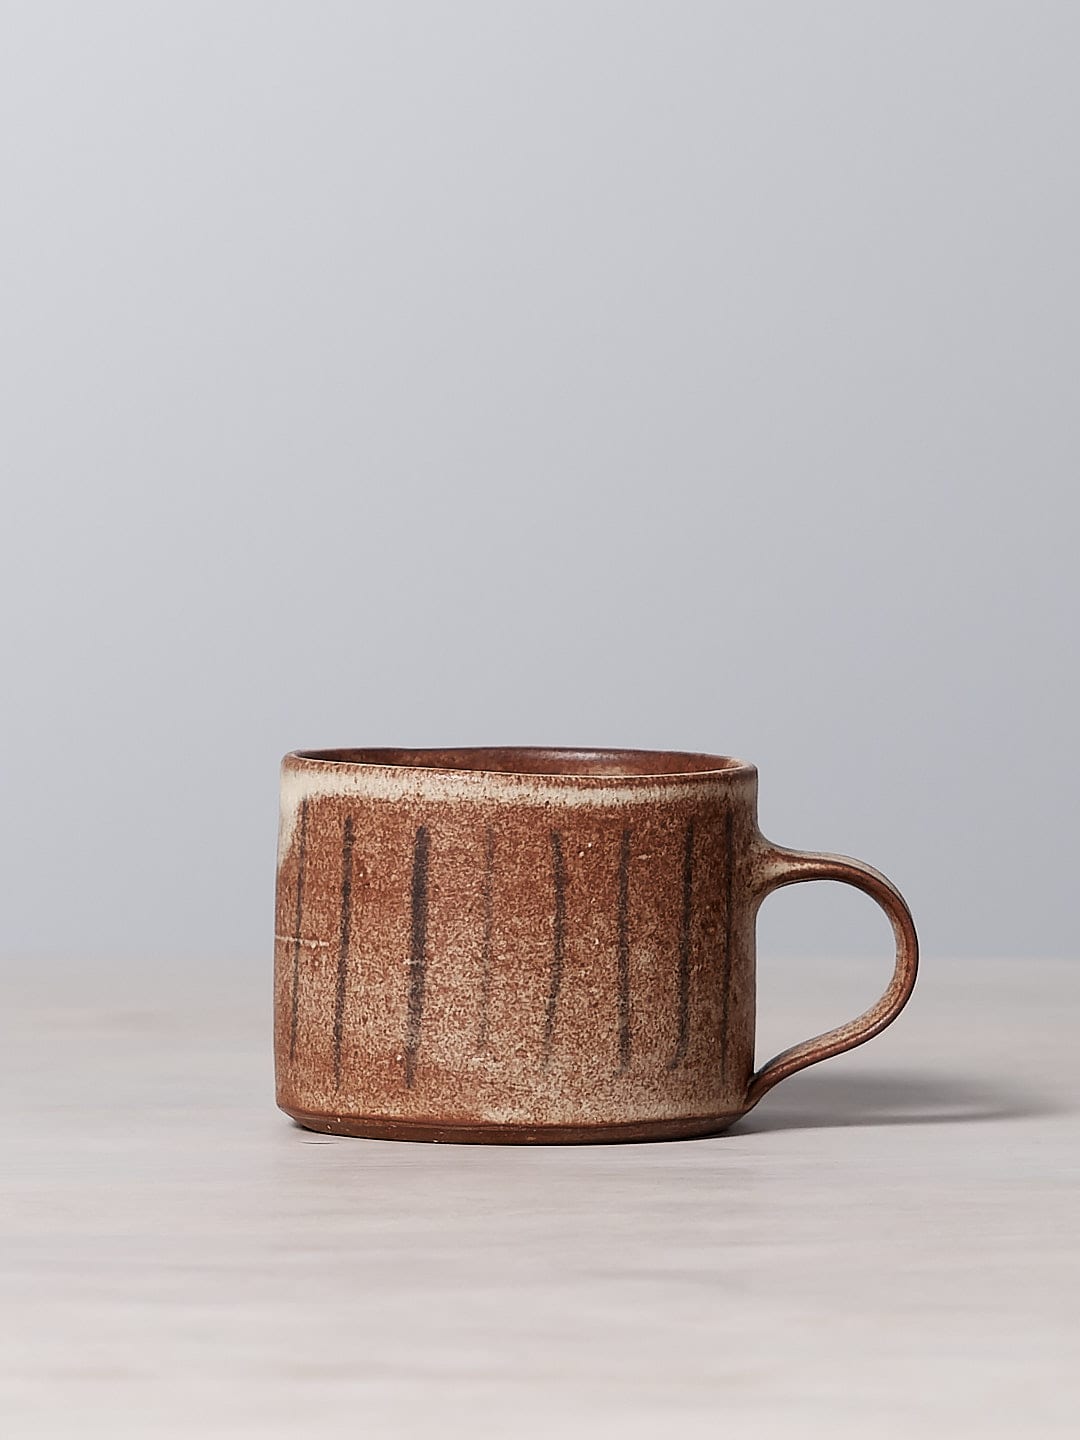 A small brown Mug – Stripes made from iron-rich clay, featuring a dishwasher safe design and a matte cream glaze, sitting on a table.